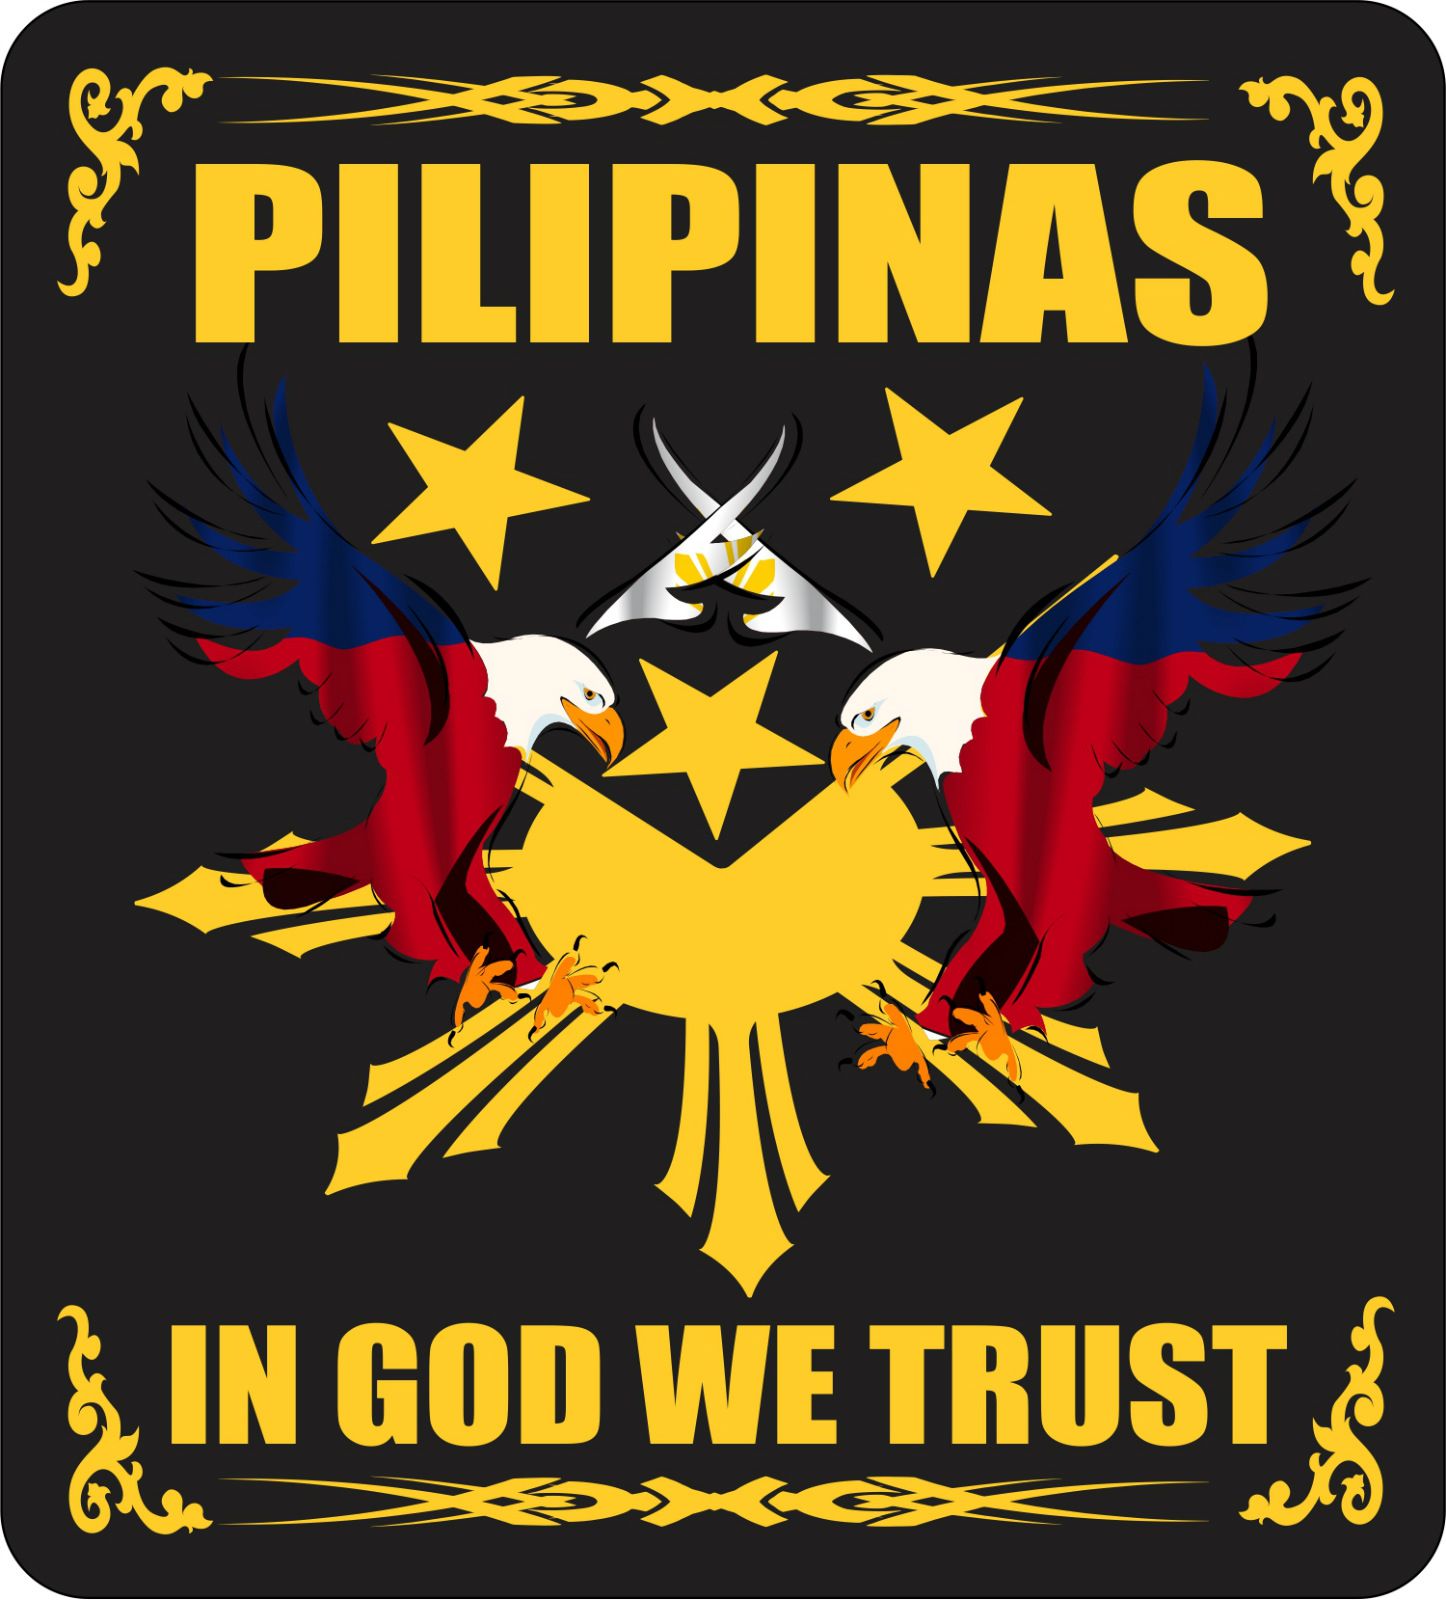 Philippines Flag Meaning. Pilipinas In God We trust, FILIPINO